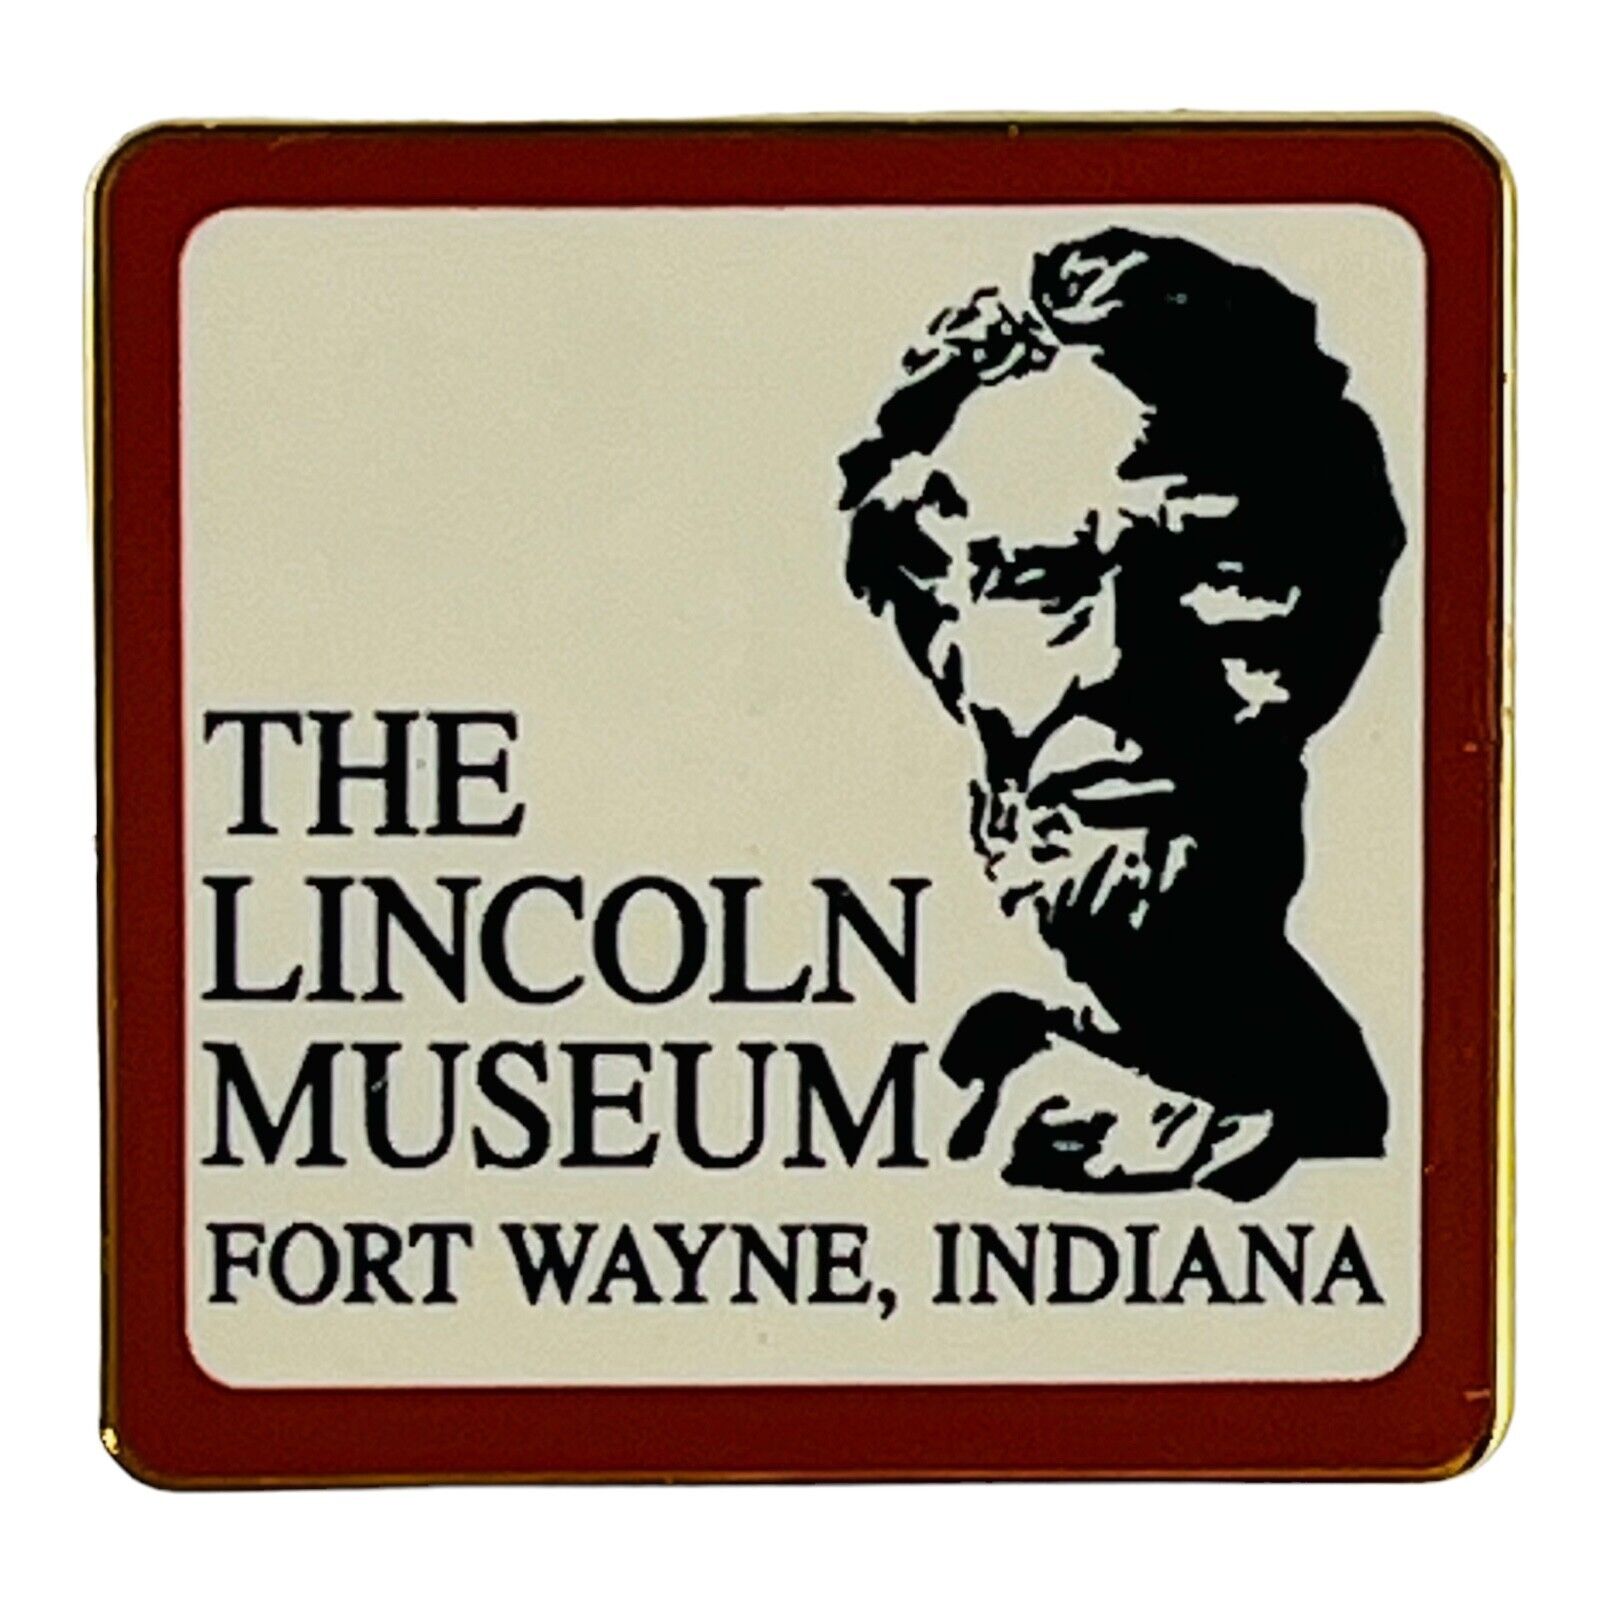 Vintage Lincoln Museum Fort Wayne Indiana Lapel Pin Travel Souvenir Gift